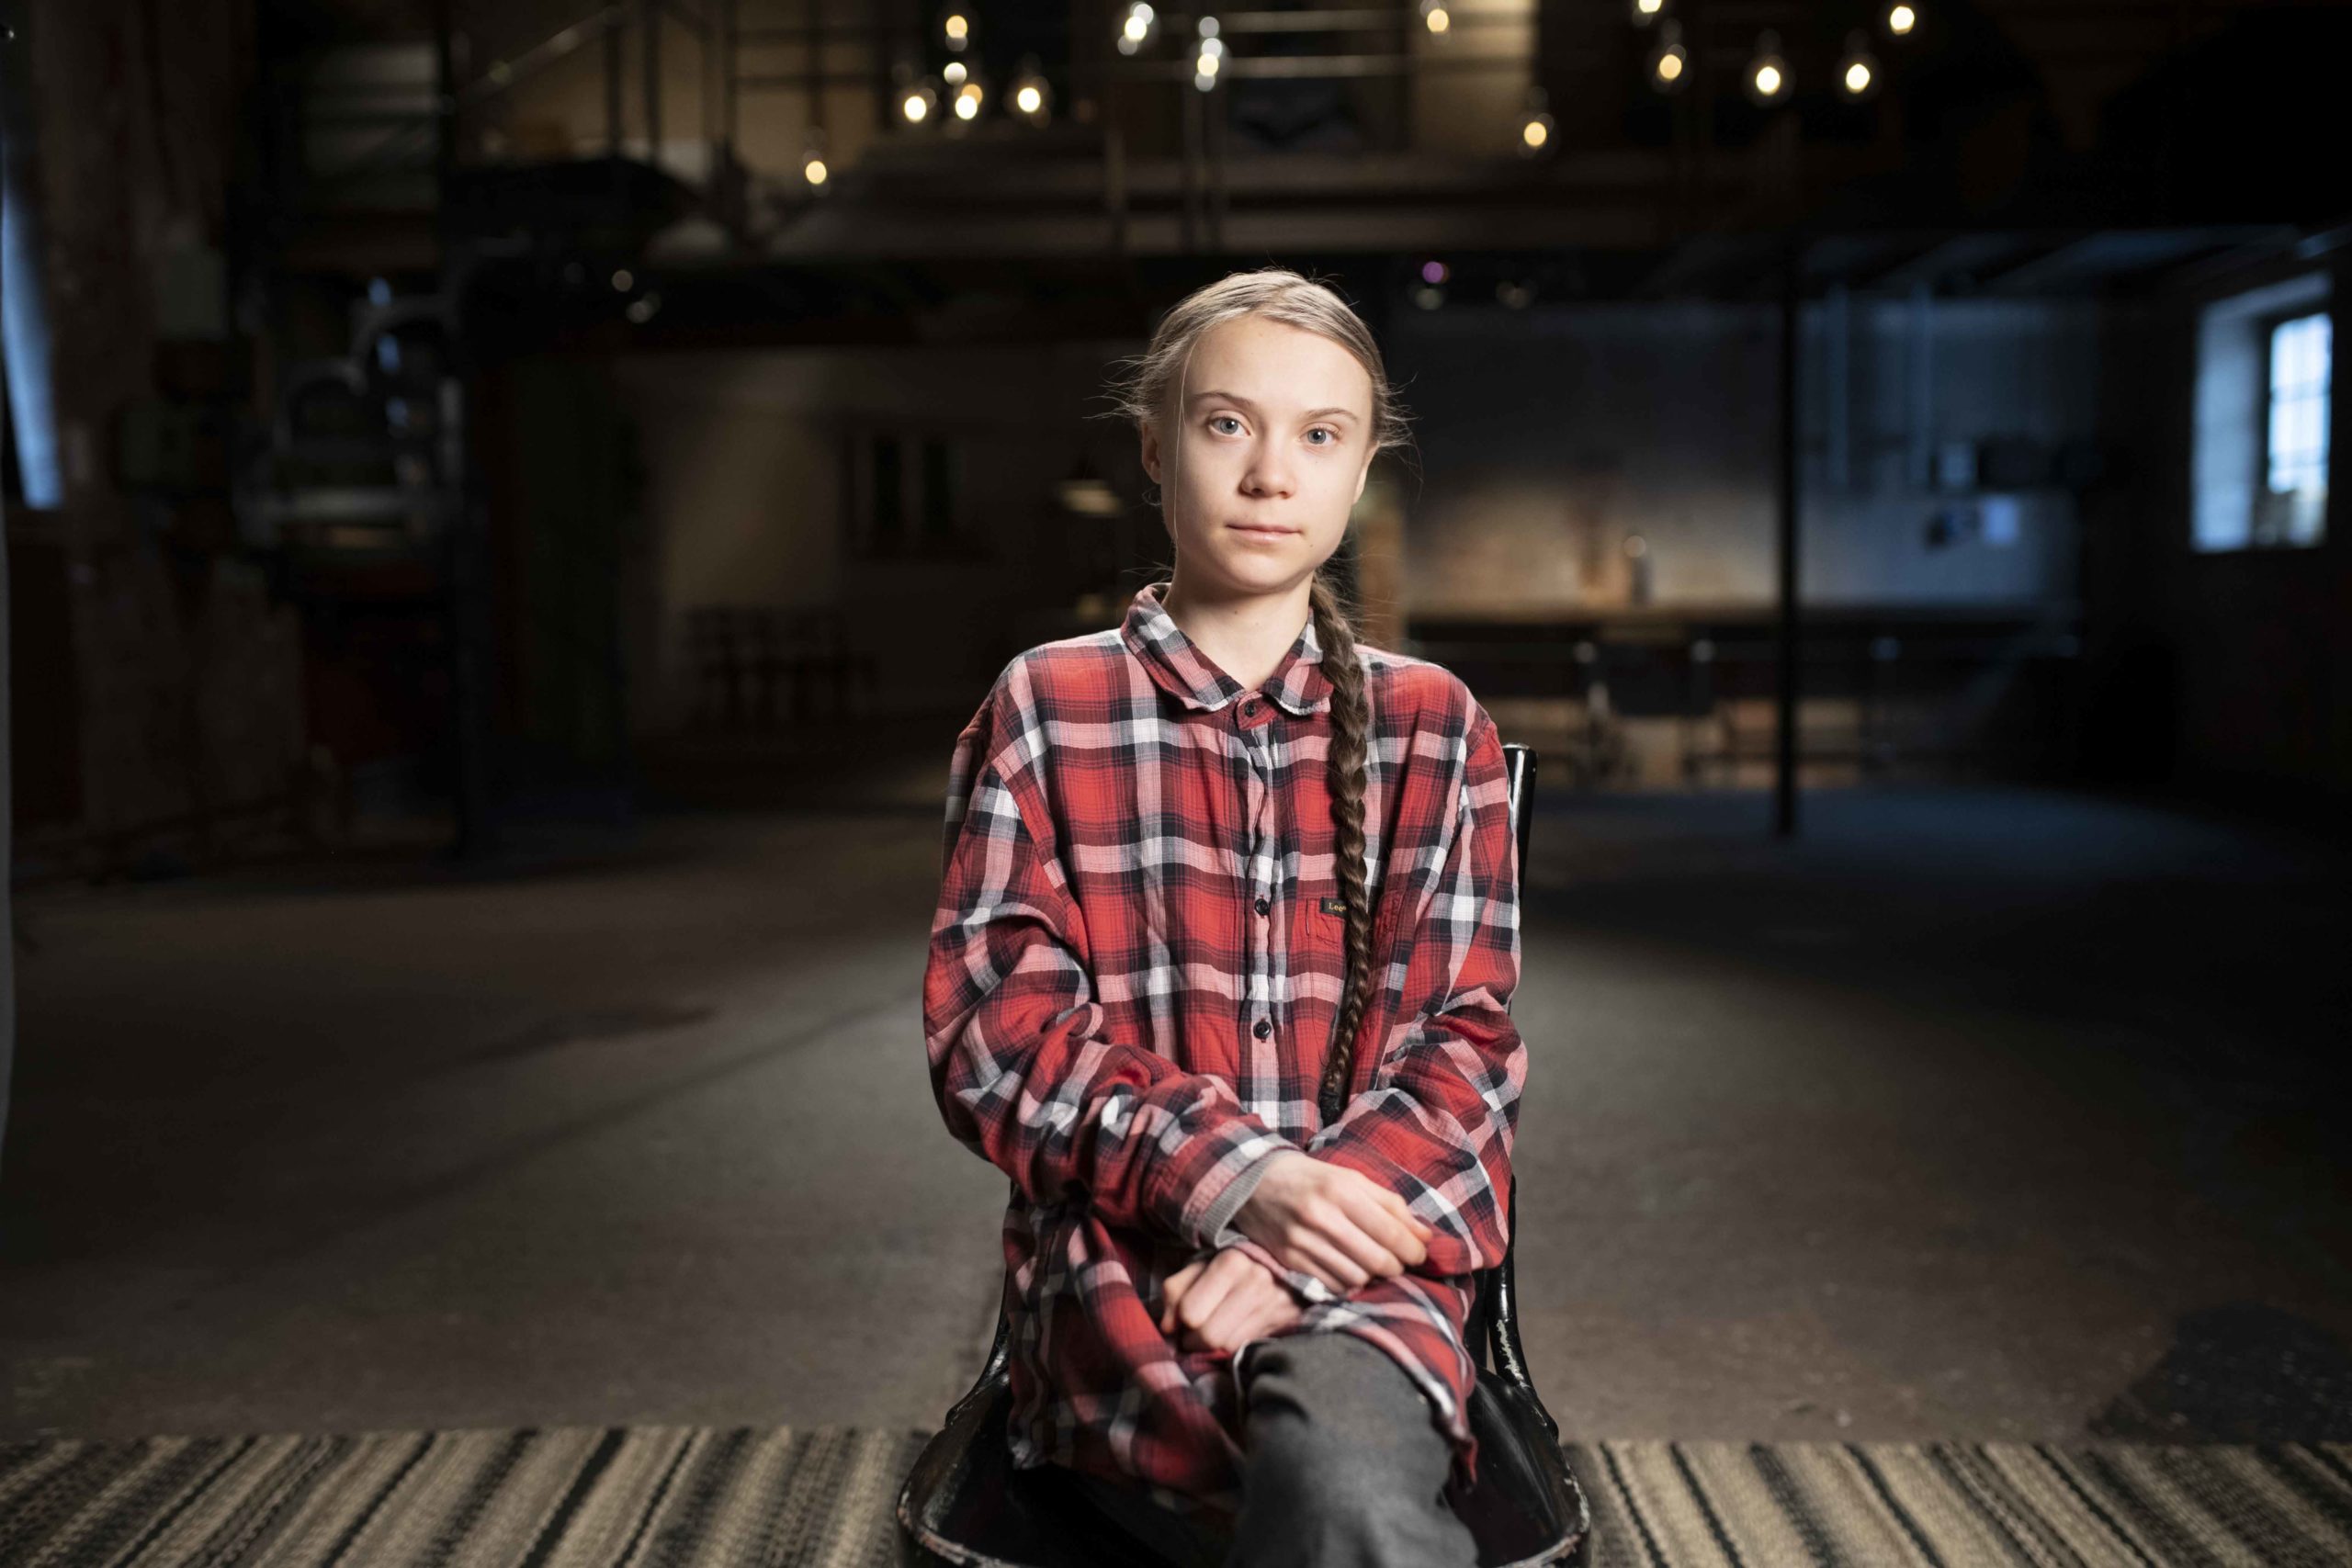 Greta Thunberg Shares How We Can All Play a Role in Climate Change